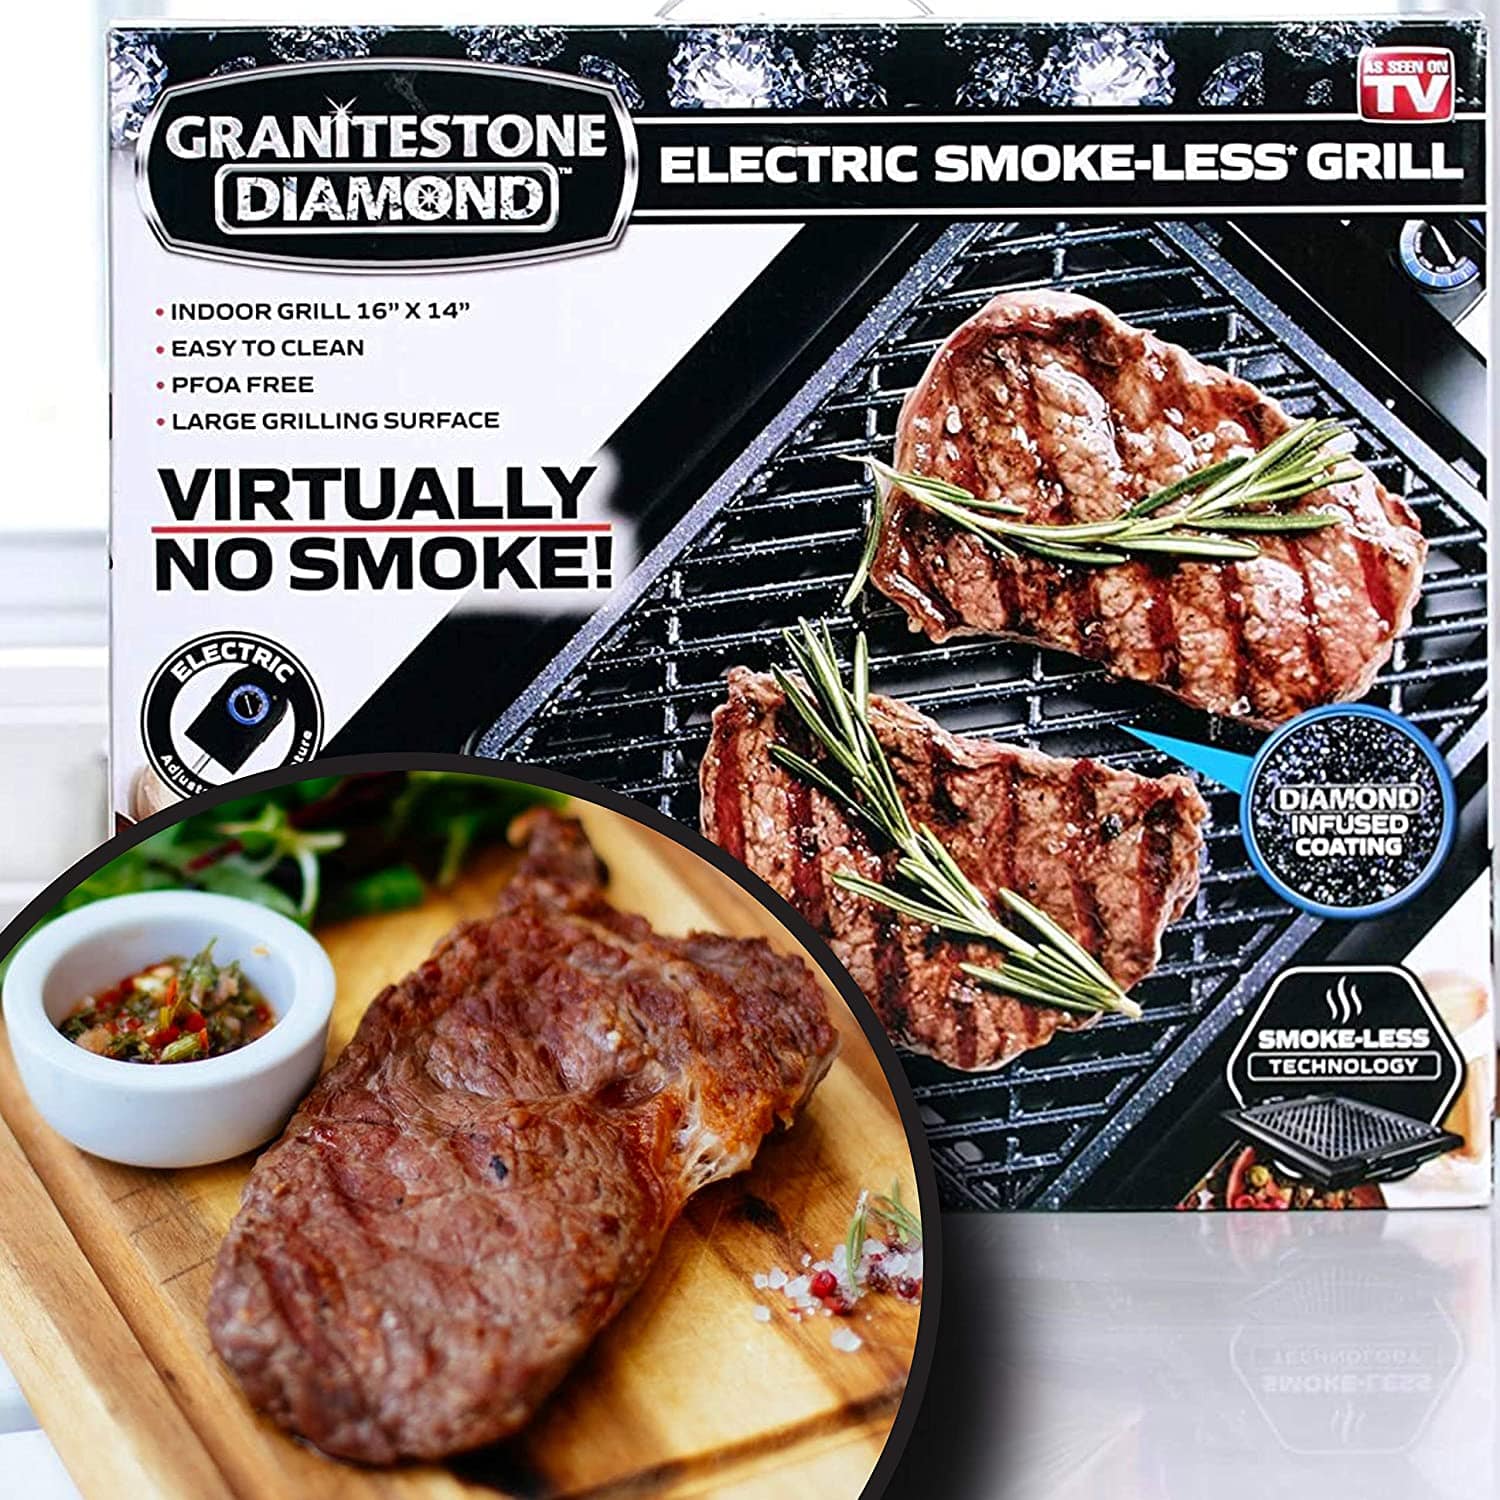 Electric Smokeless Grill, As Seen on TV